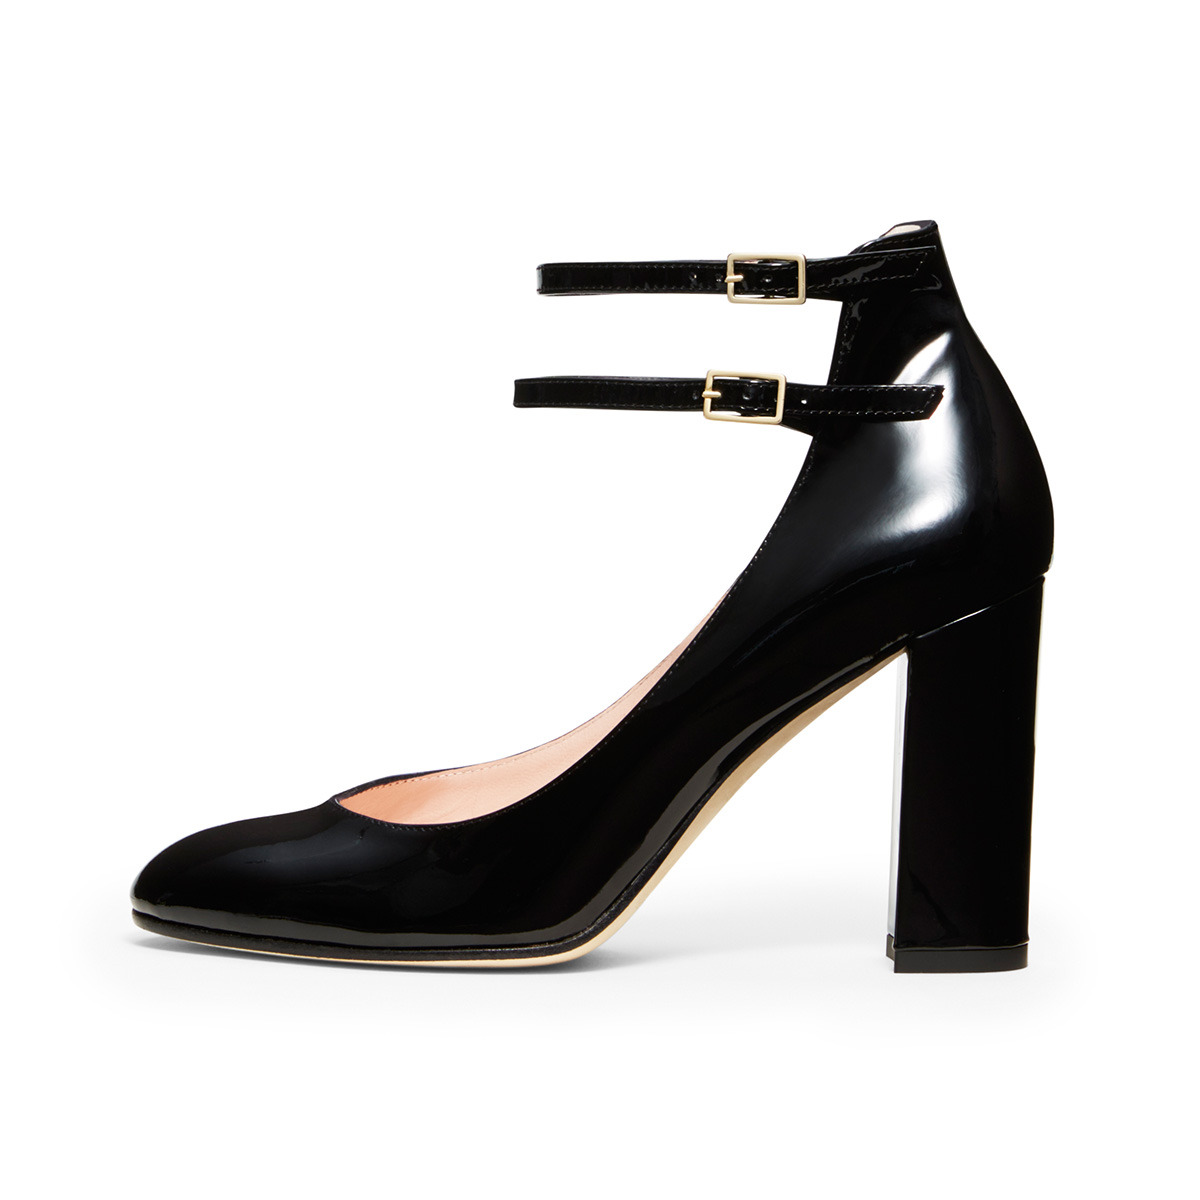 kate spade new york — fall must-have: the shoe shiny patent leather...